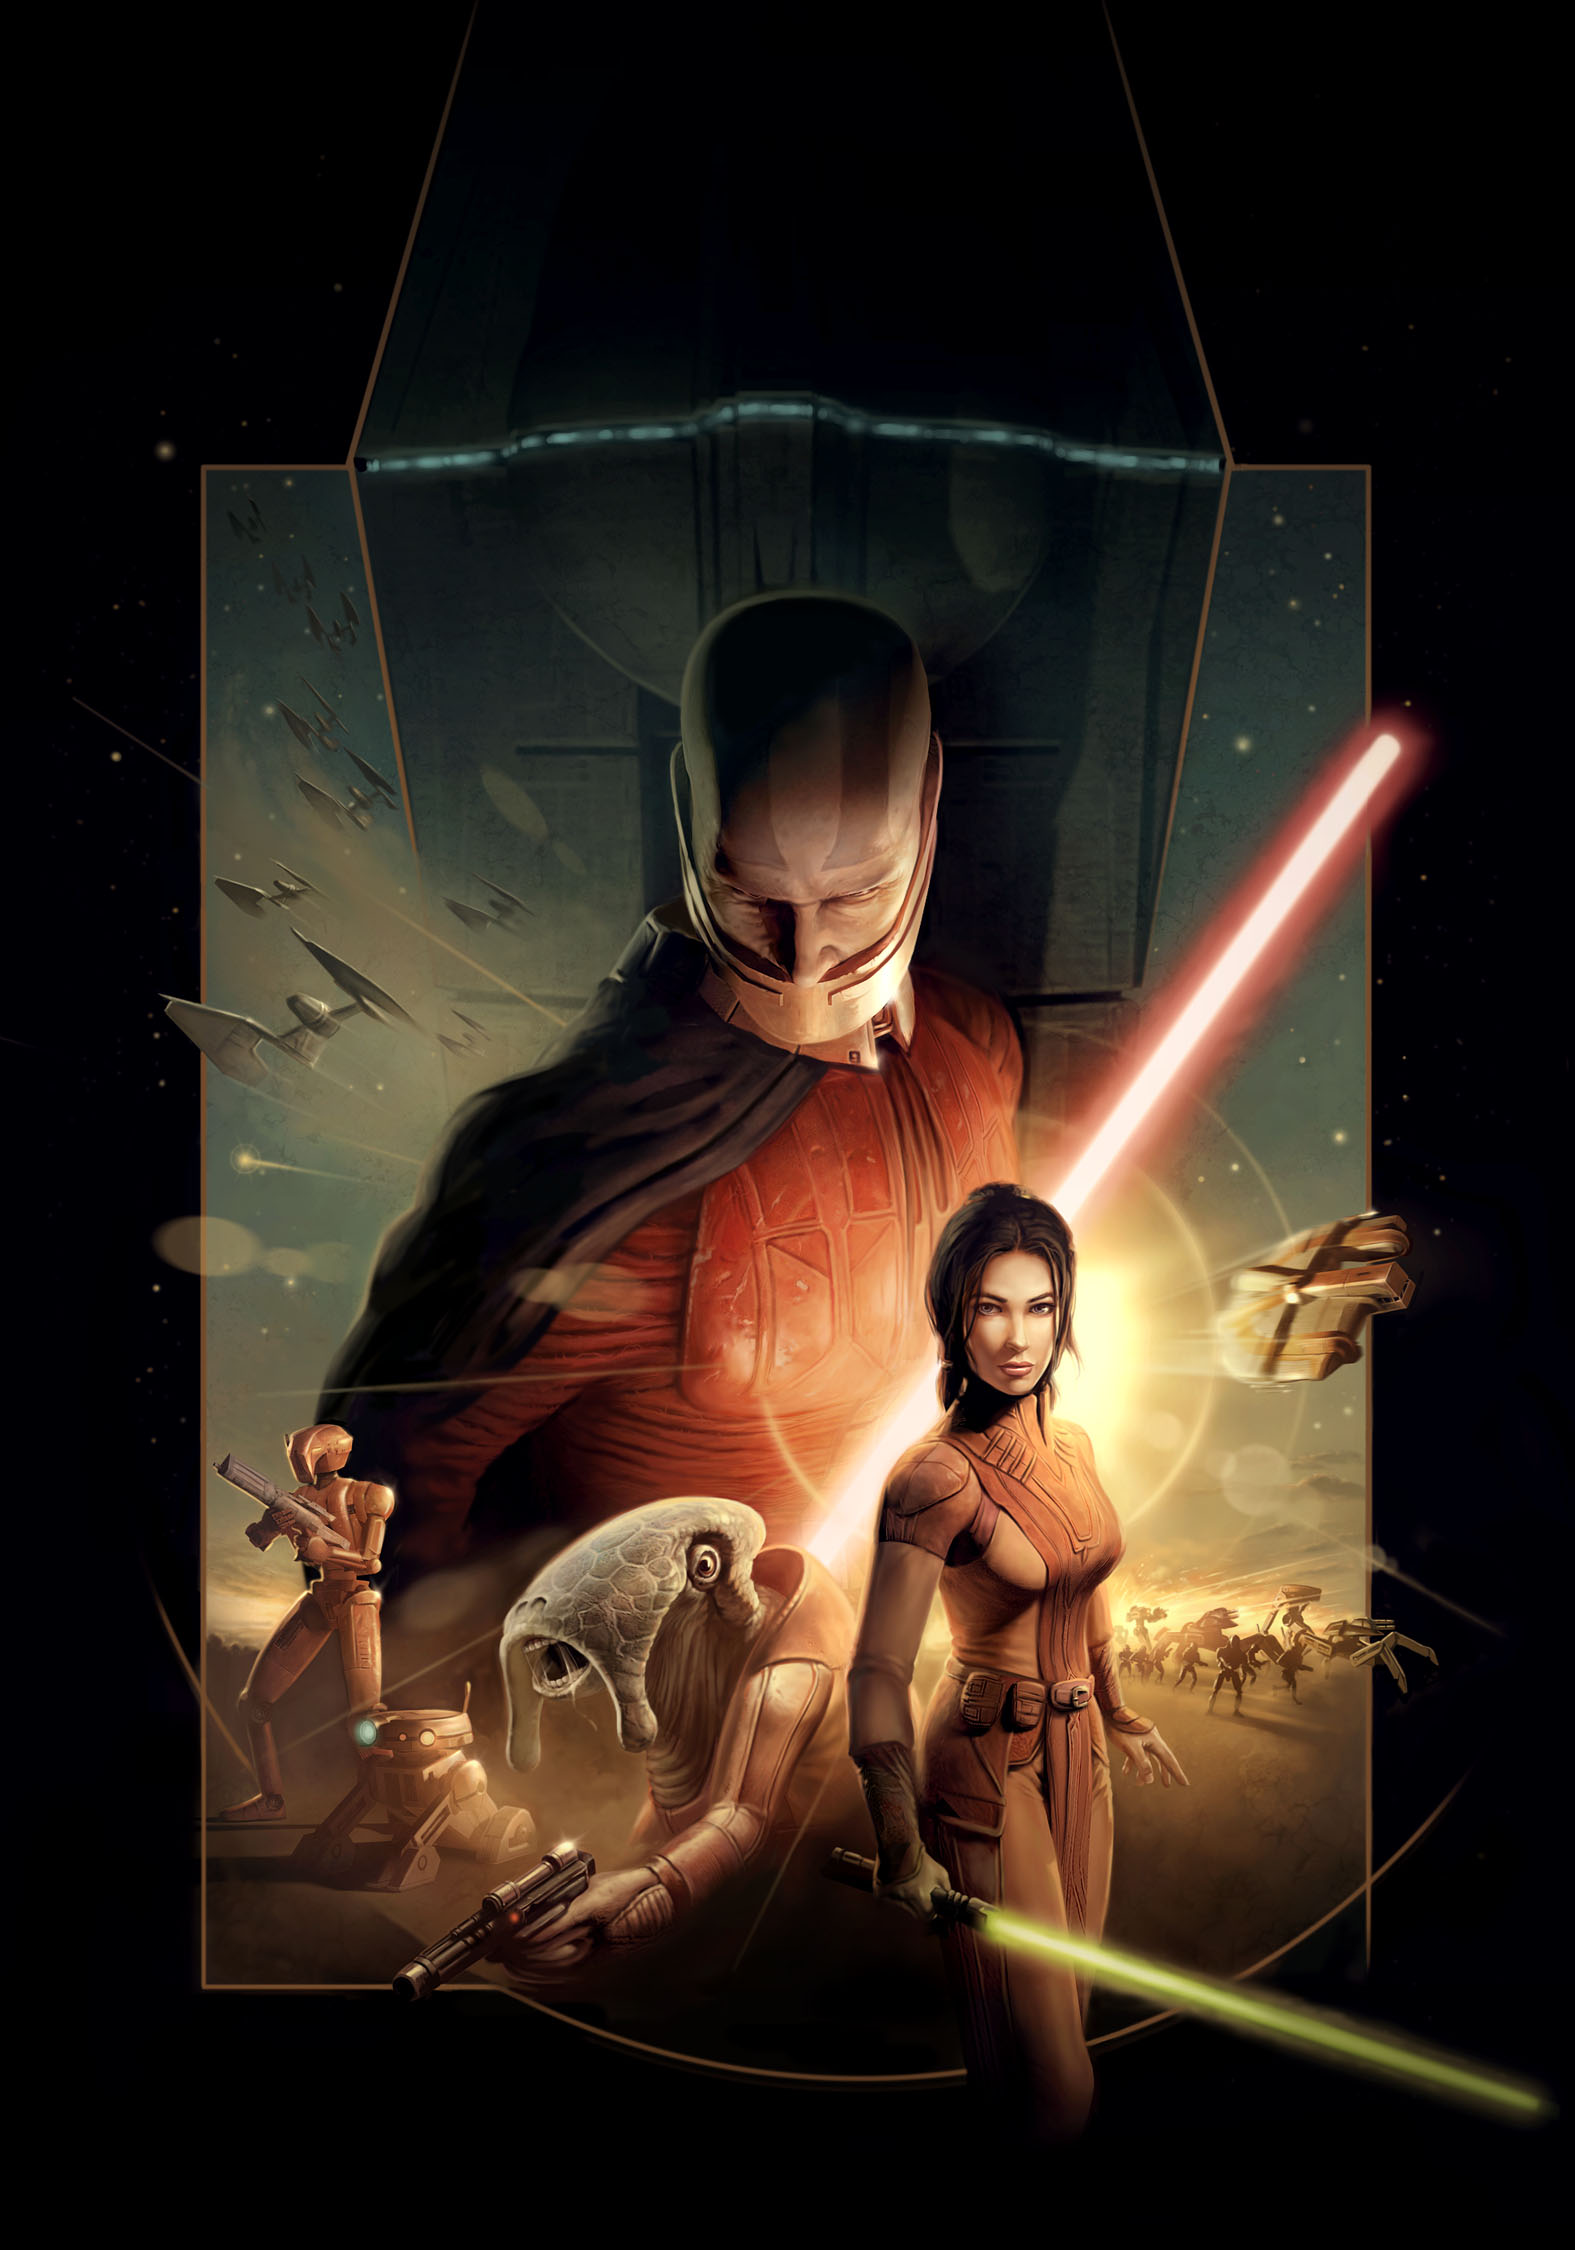 Star wars the knight of the old republic русификатор steam фото 11